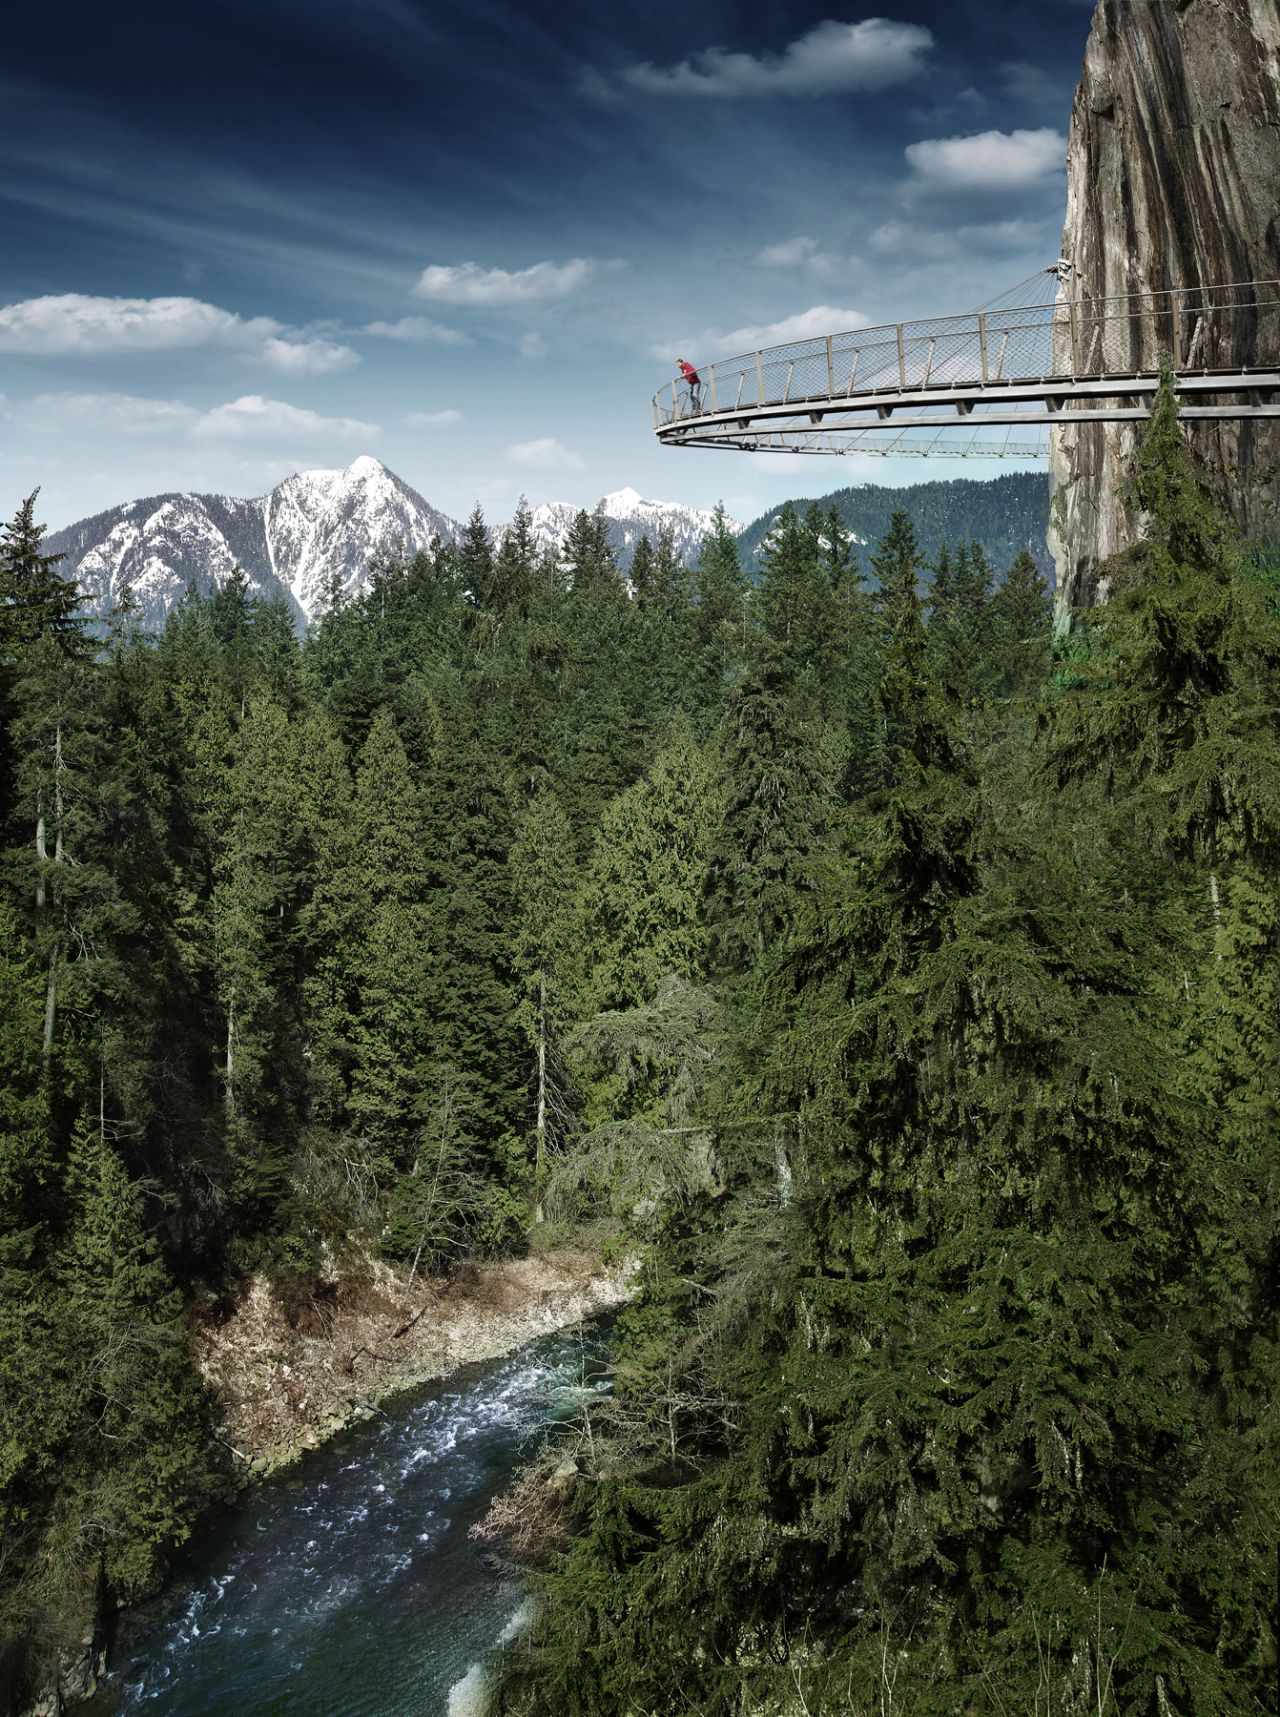 The Cliffwalk is a 700-foot (213-meter) walkway attached to a granite cliff face above the Capilano River in British Columbia. The highest point is 300 feet (90 meters) above the river.